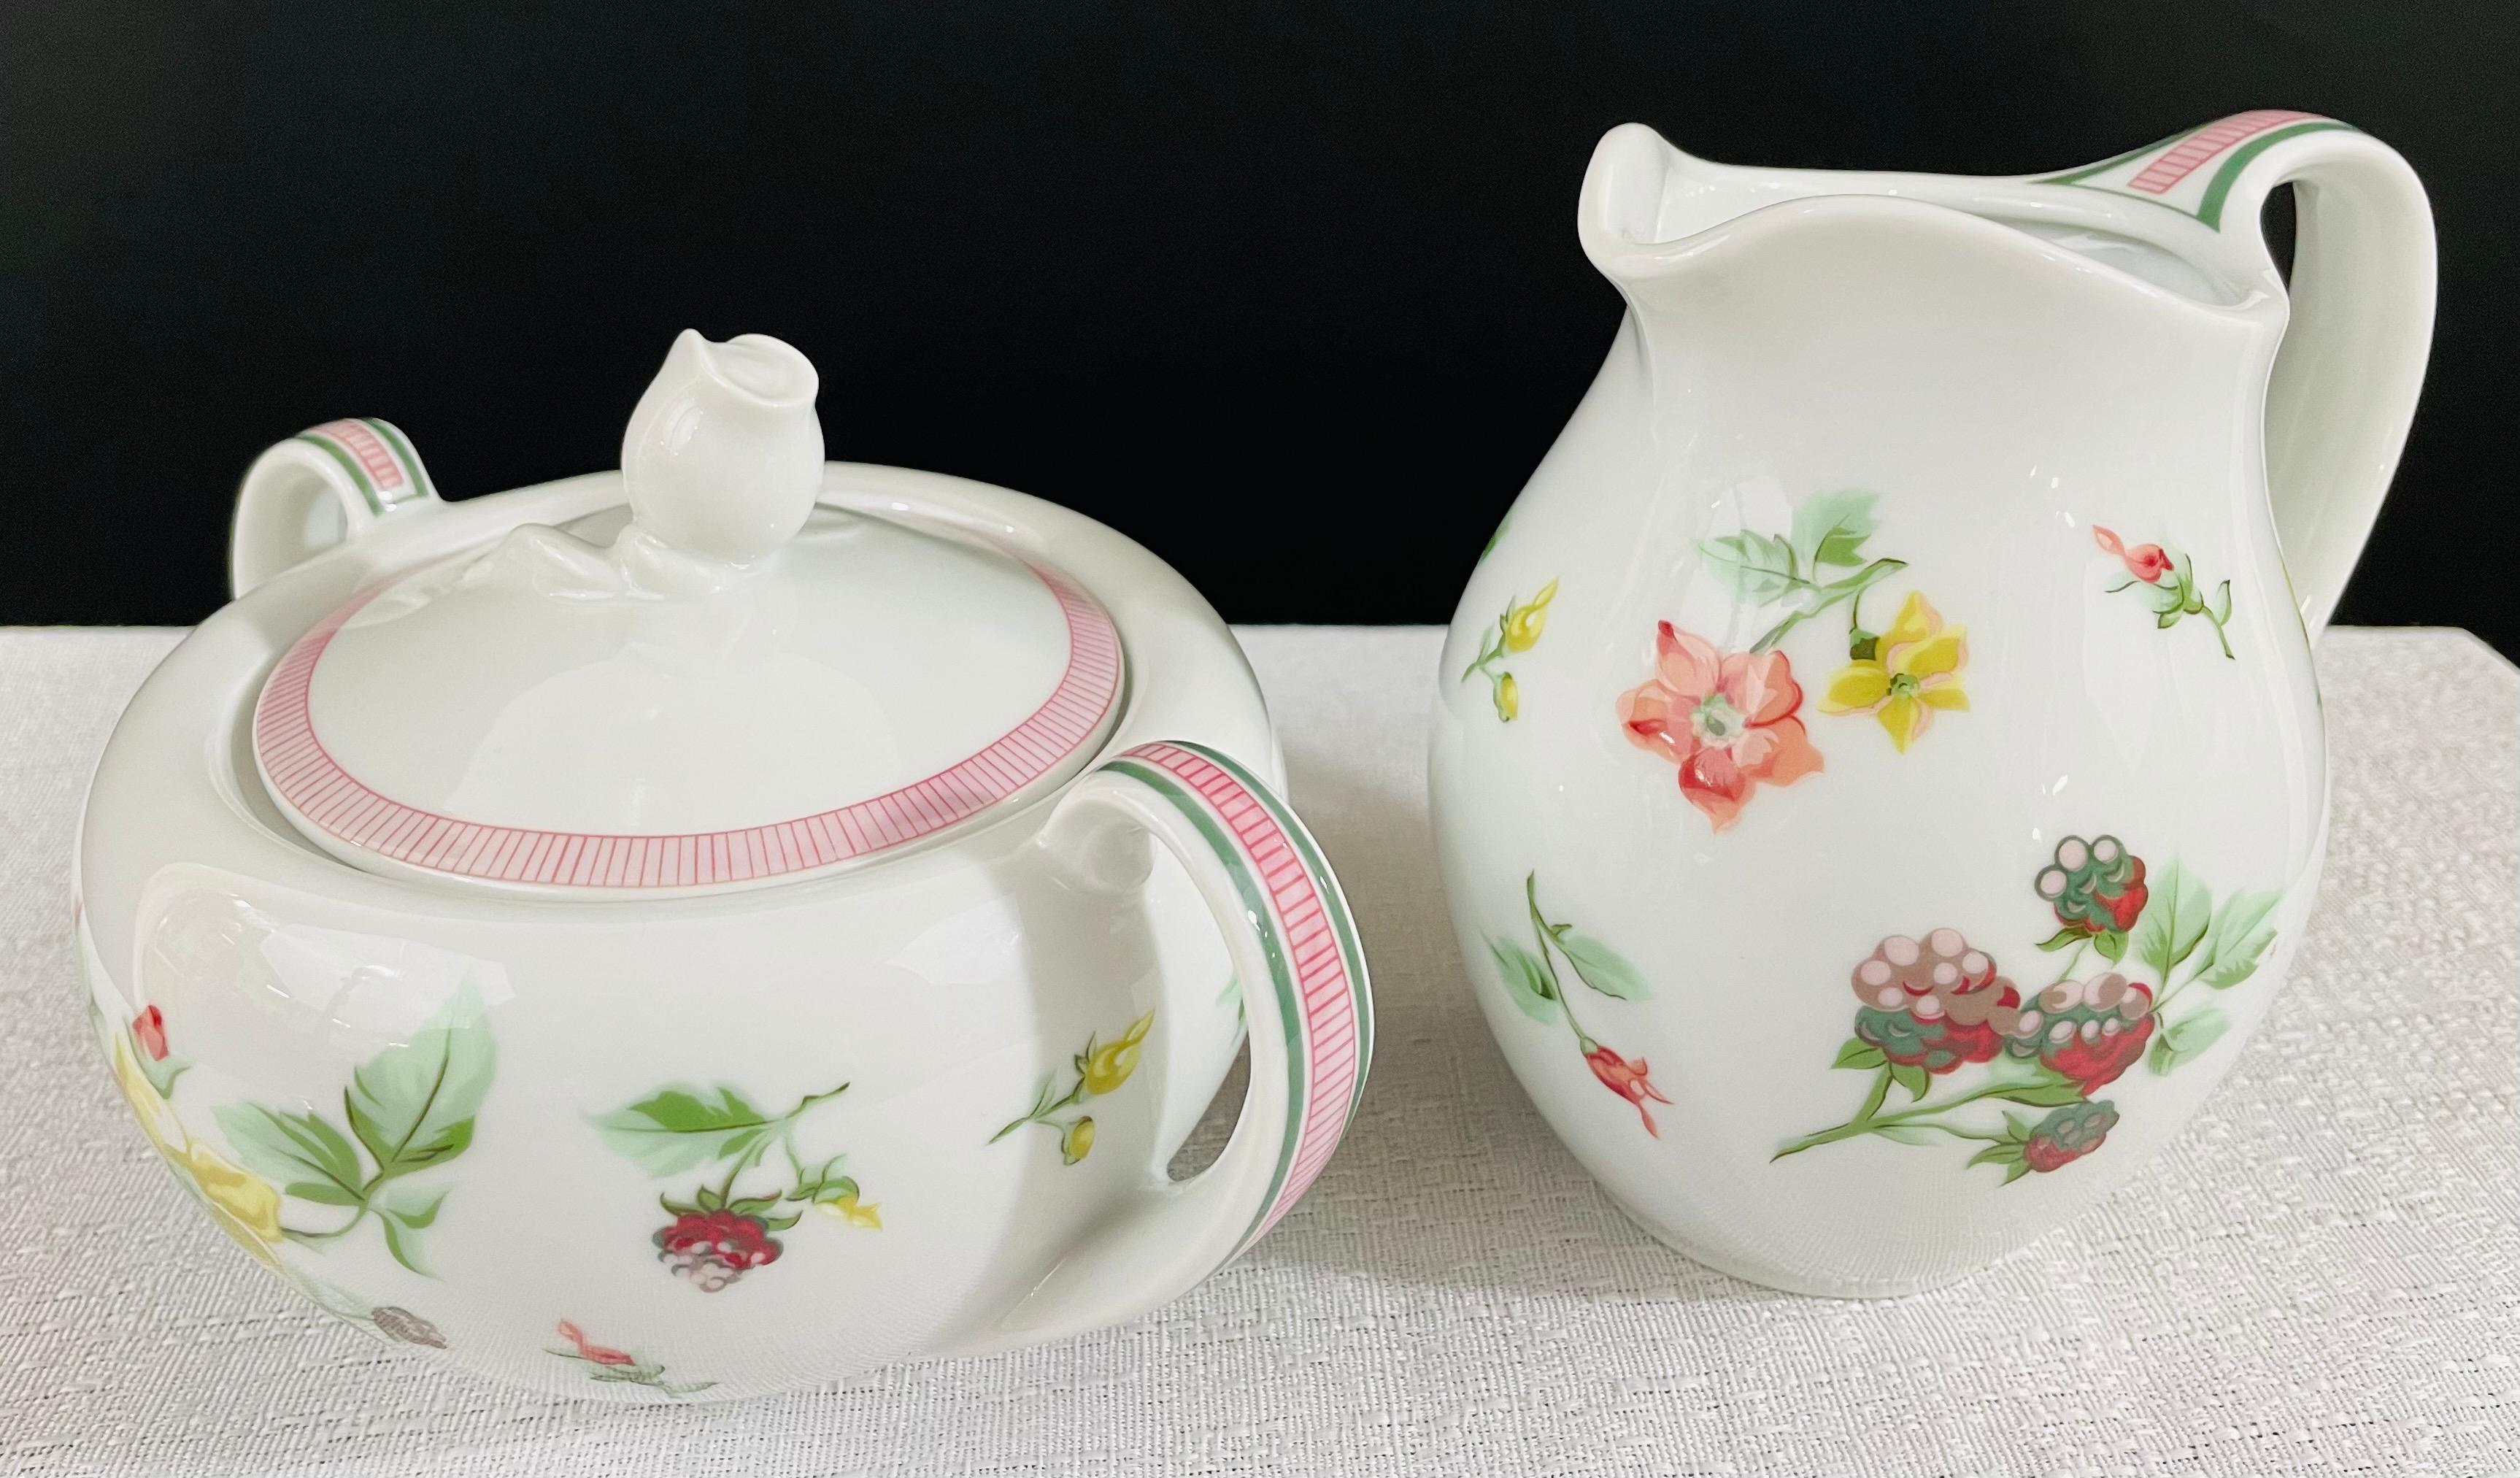 A Christian Dior Provence collection set of two porcelain pieces, a sugar bowl and a creamer. Both Christian Dior dishes feature exquisite floral design on white background and are signed in the bottom 